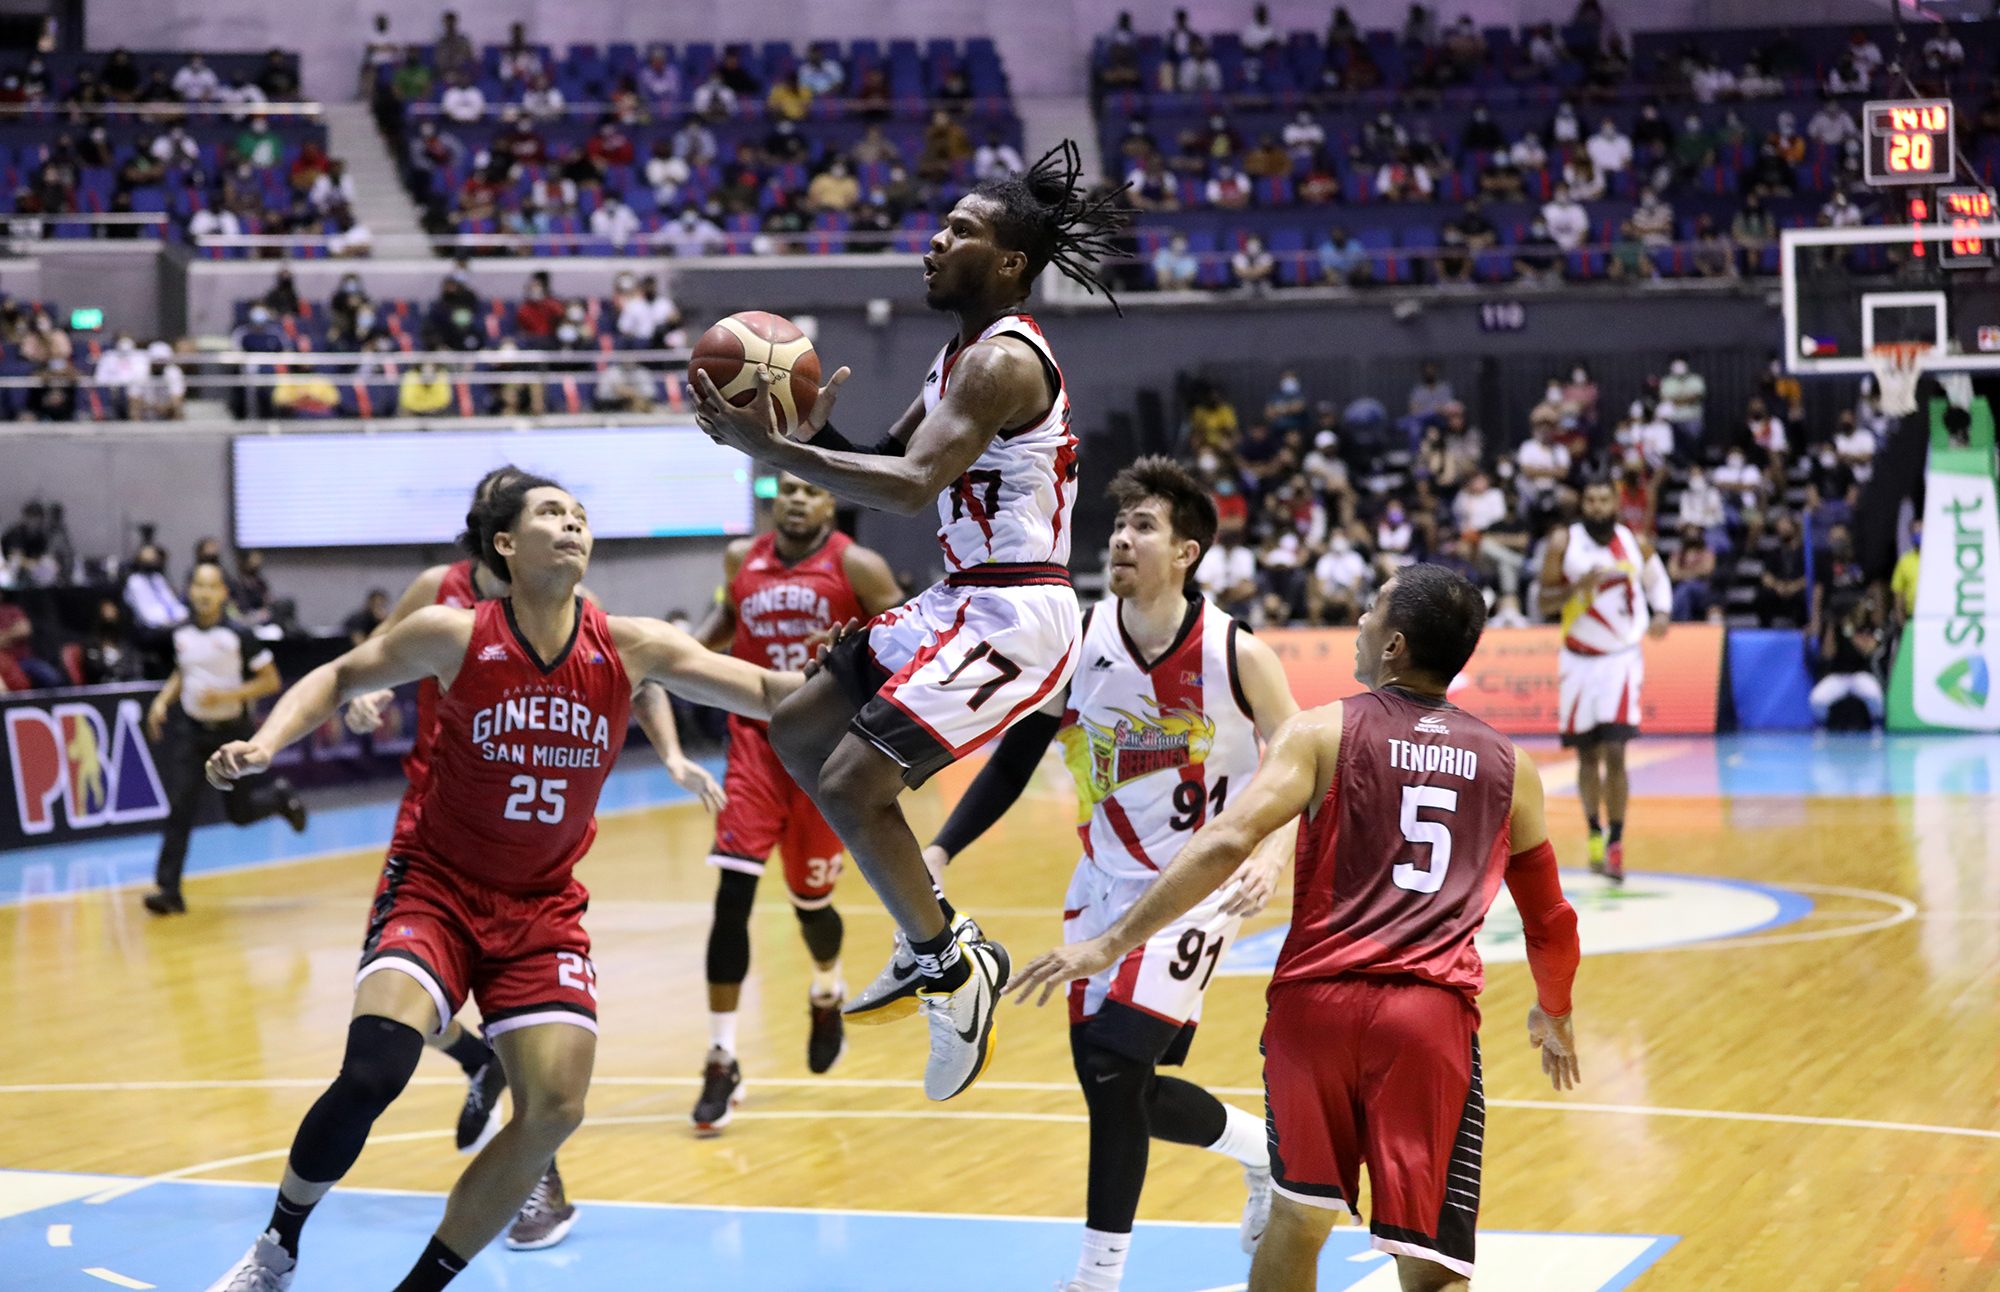 SMB rides third quarter storm, sends Ginebra to first 4-game slide in 6 seasons